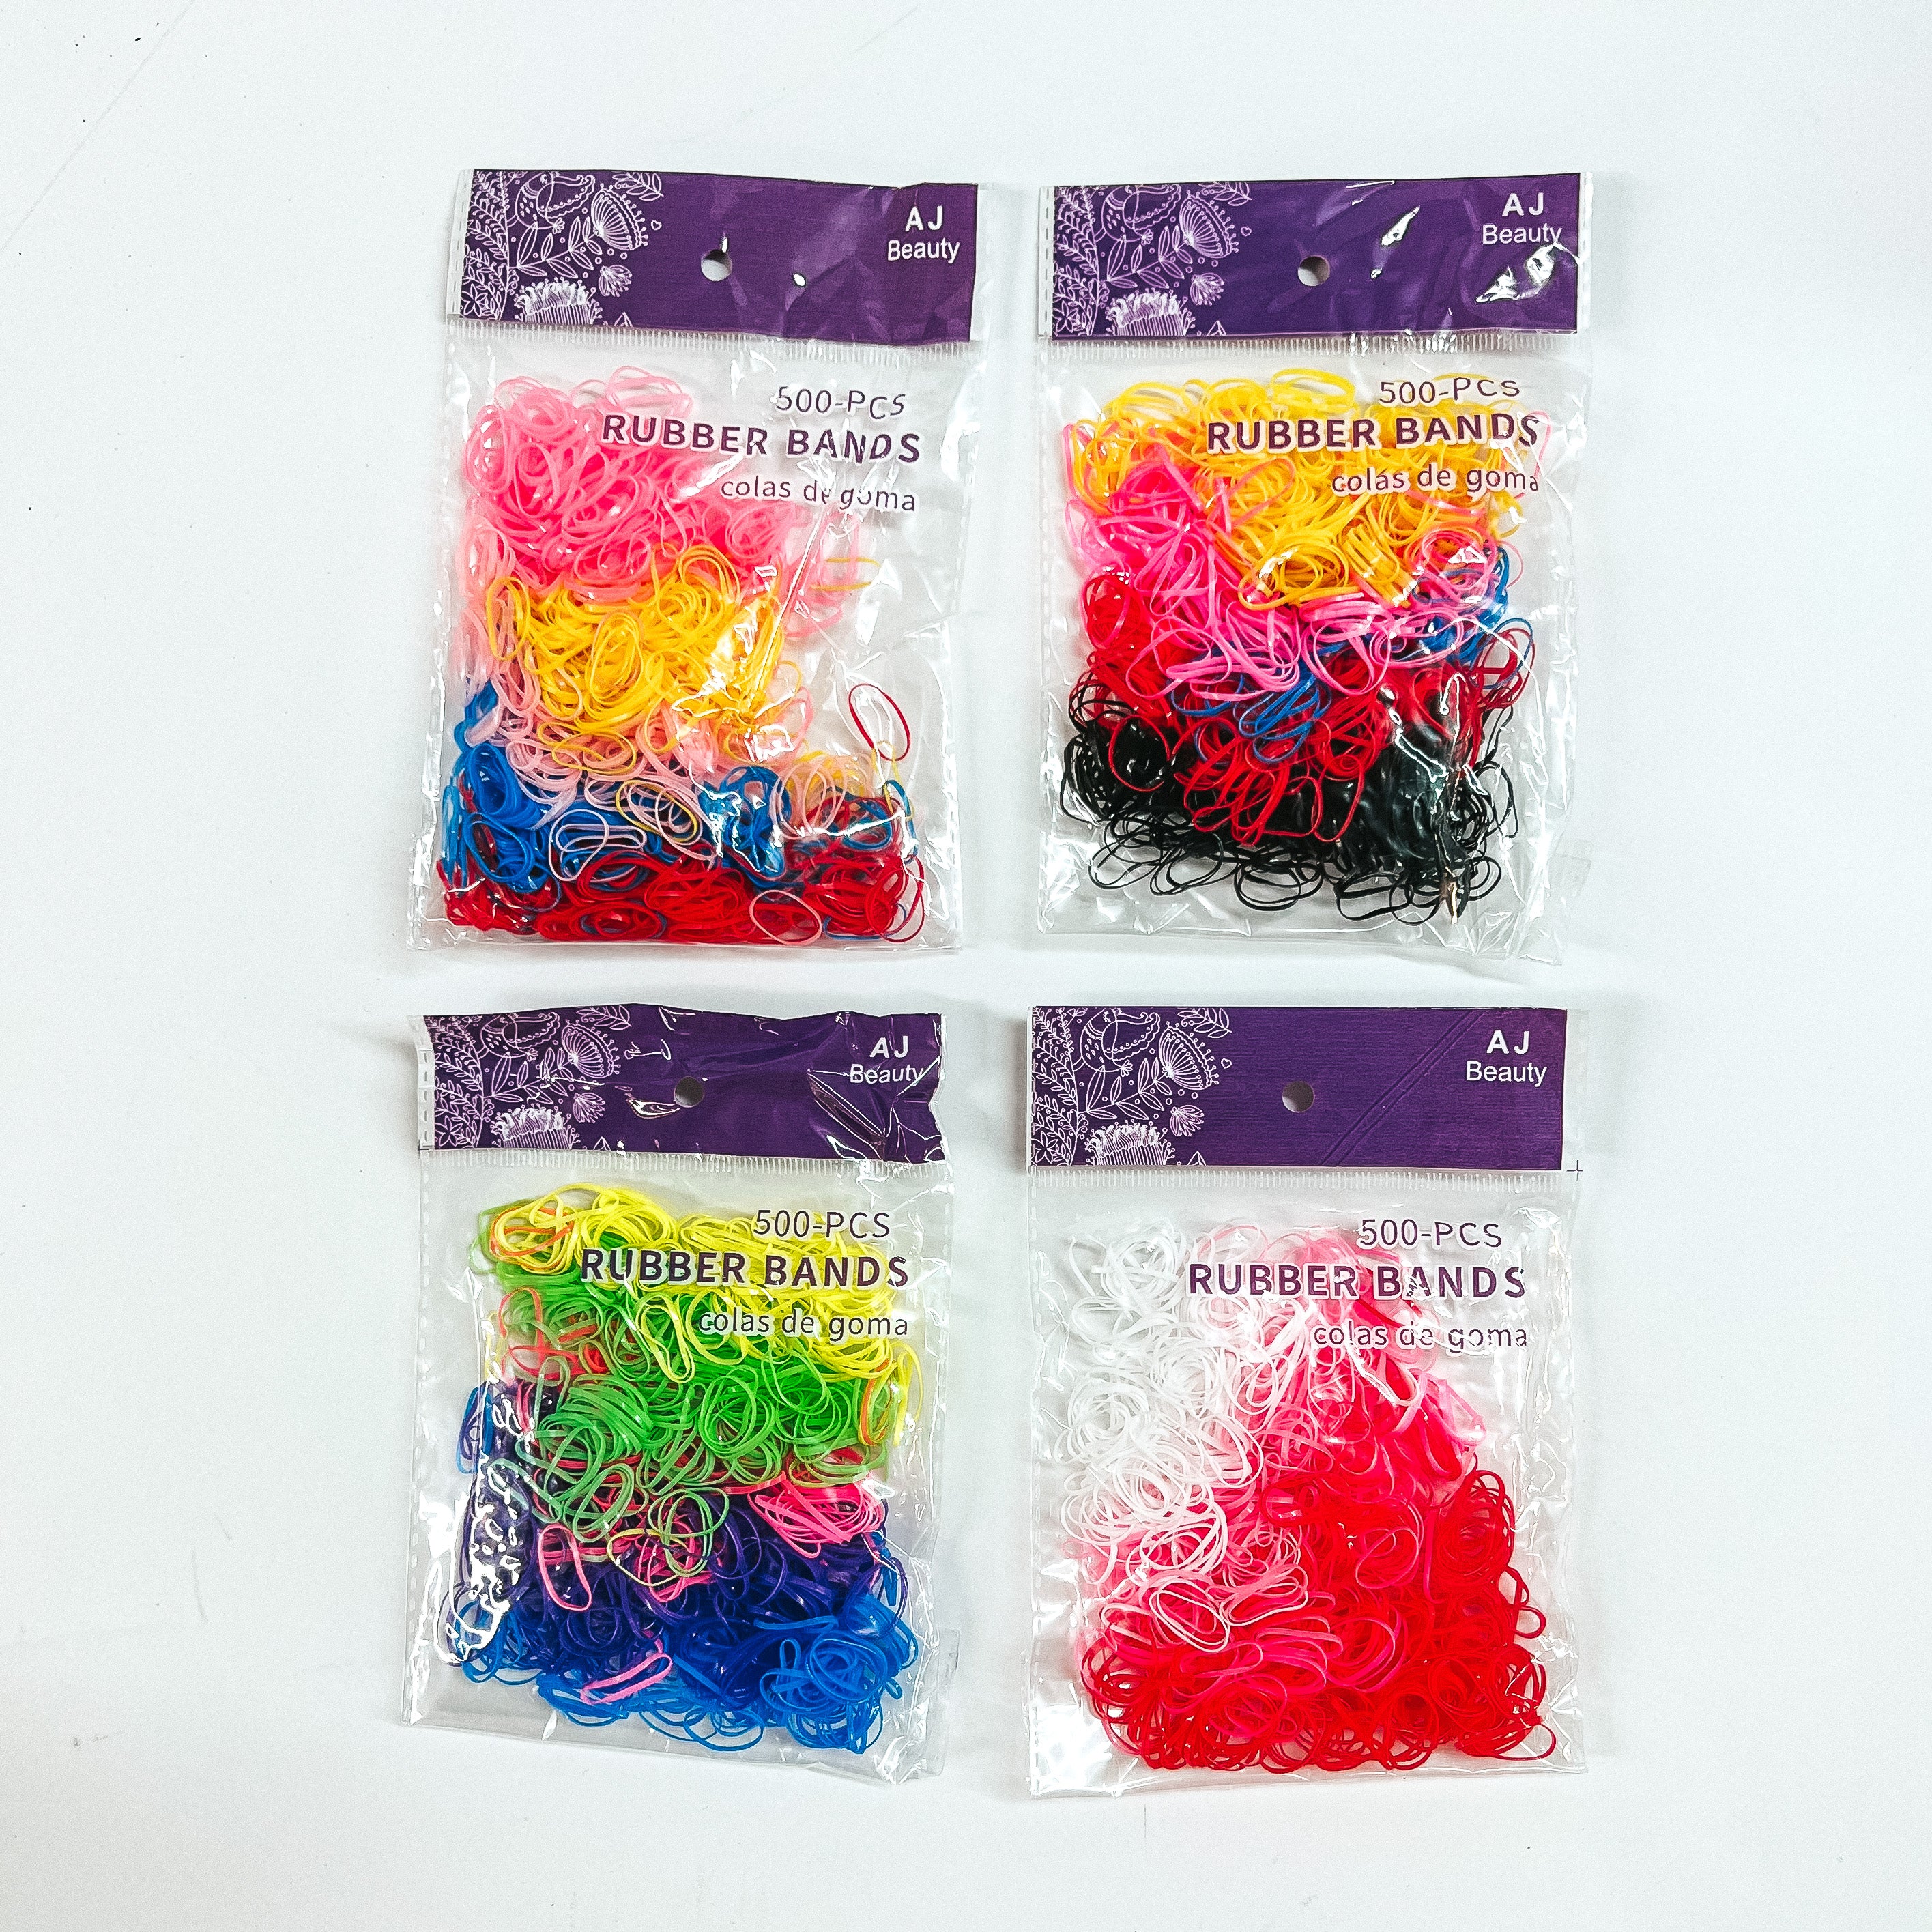 There are four packs of multicolored small rubber bands. From top to bottom; pink/yellow/blue/red, yellow/pink/blue/red/black. Neon yellow/neon green/pink/dark blue/ blue and white/pink/red. These rubber bands are placed in a clear and purple bag laying on a white background.